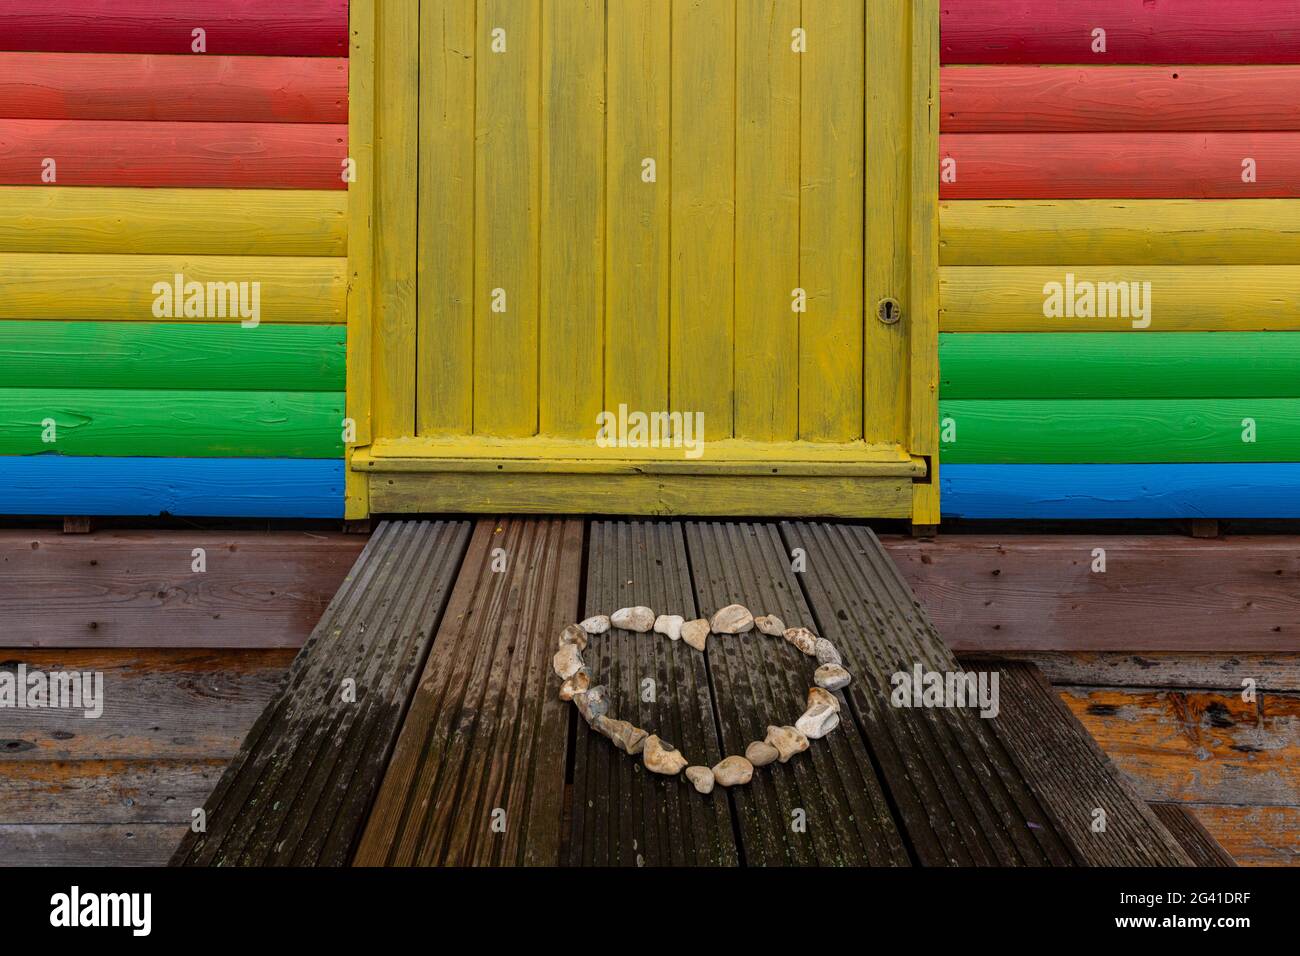 Whitstable, United Kingdom, June 18, 2021. A heart made of stones is seen in front of NHS colours wood shed at the beach  in Whitstable, a coastal touristic town in south-eastern England as vary poor rainy weather disturb holidaymakers as the holiday season begins. One of the strictest Coronavirus lockdowns in the world  is partially lifted as the United Kingdom managed to vaccinate a large part of the population and the number of Covid cases is low. People are able to socialize in limited numbers and are able to book holidays. Stock Photo